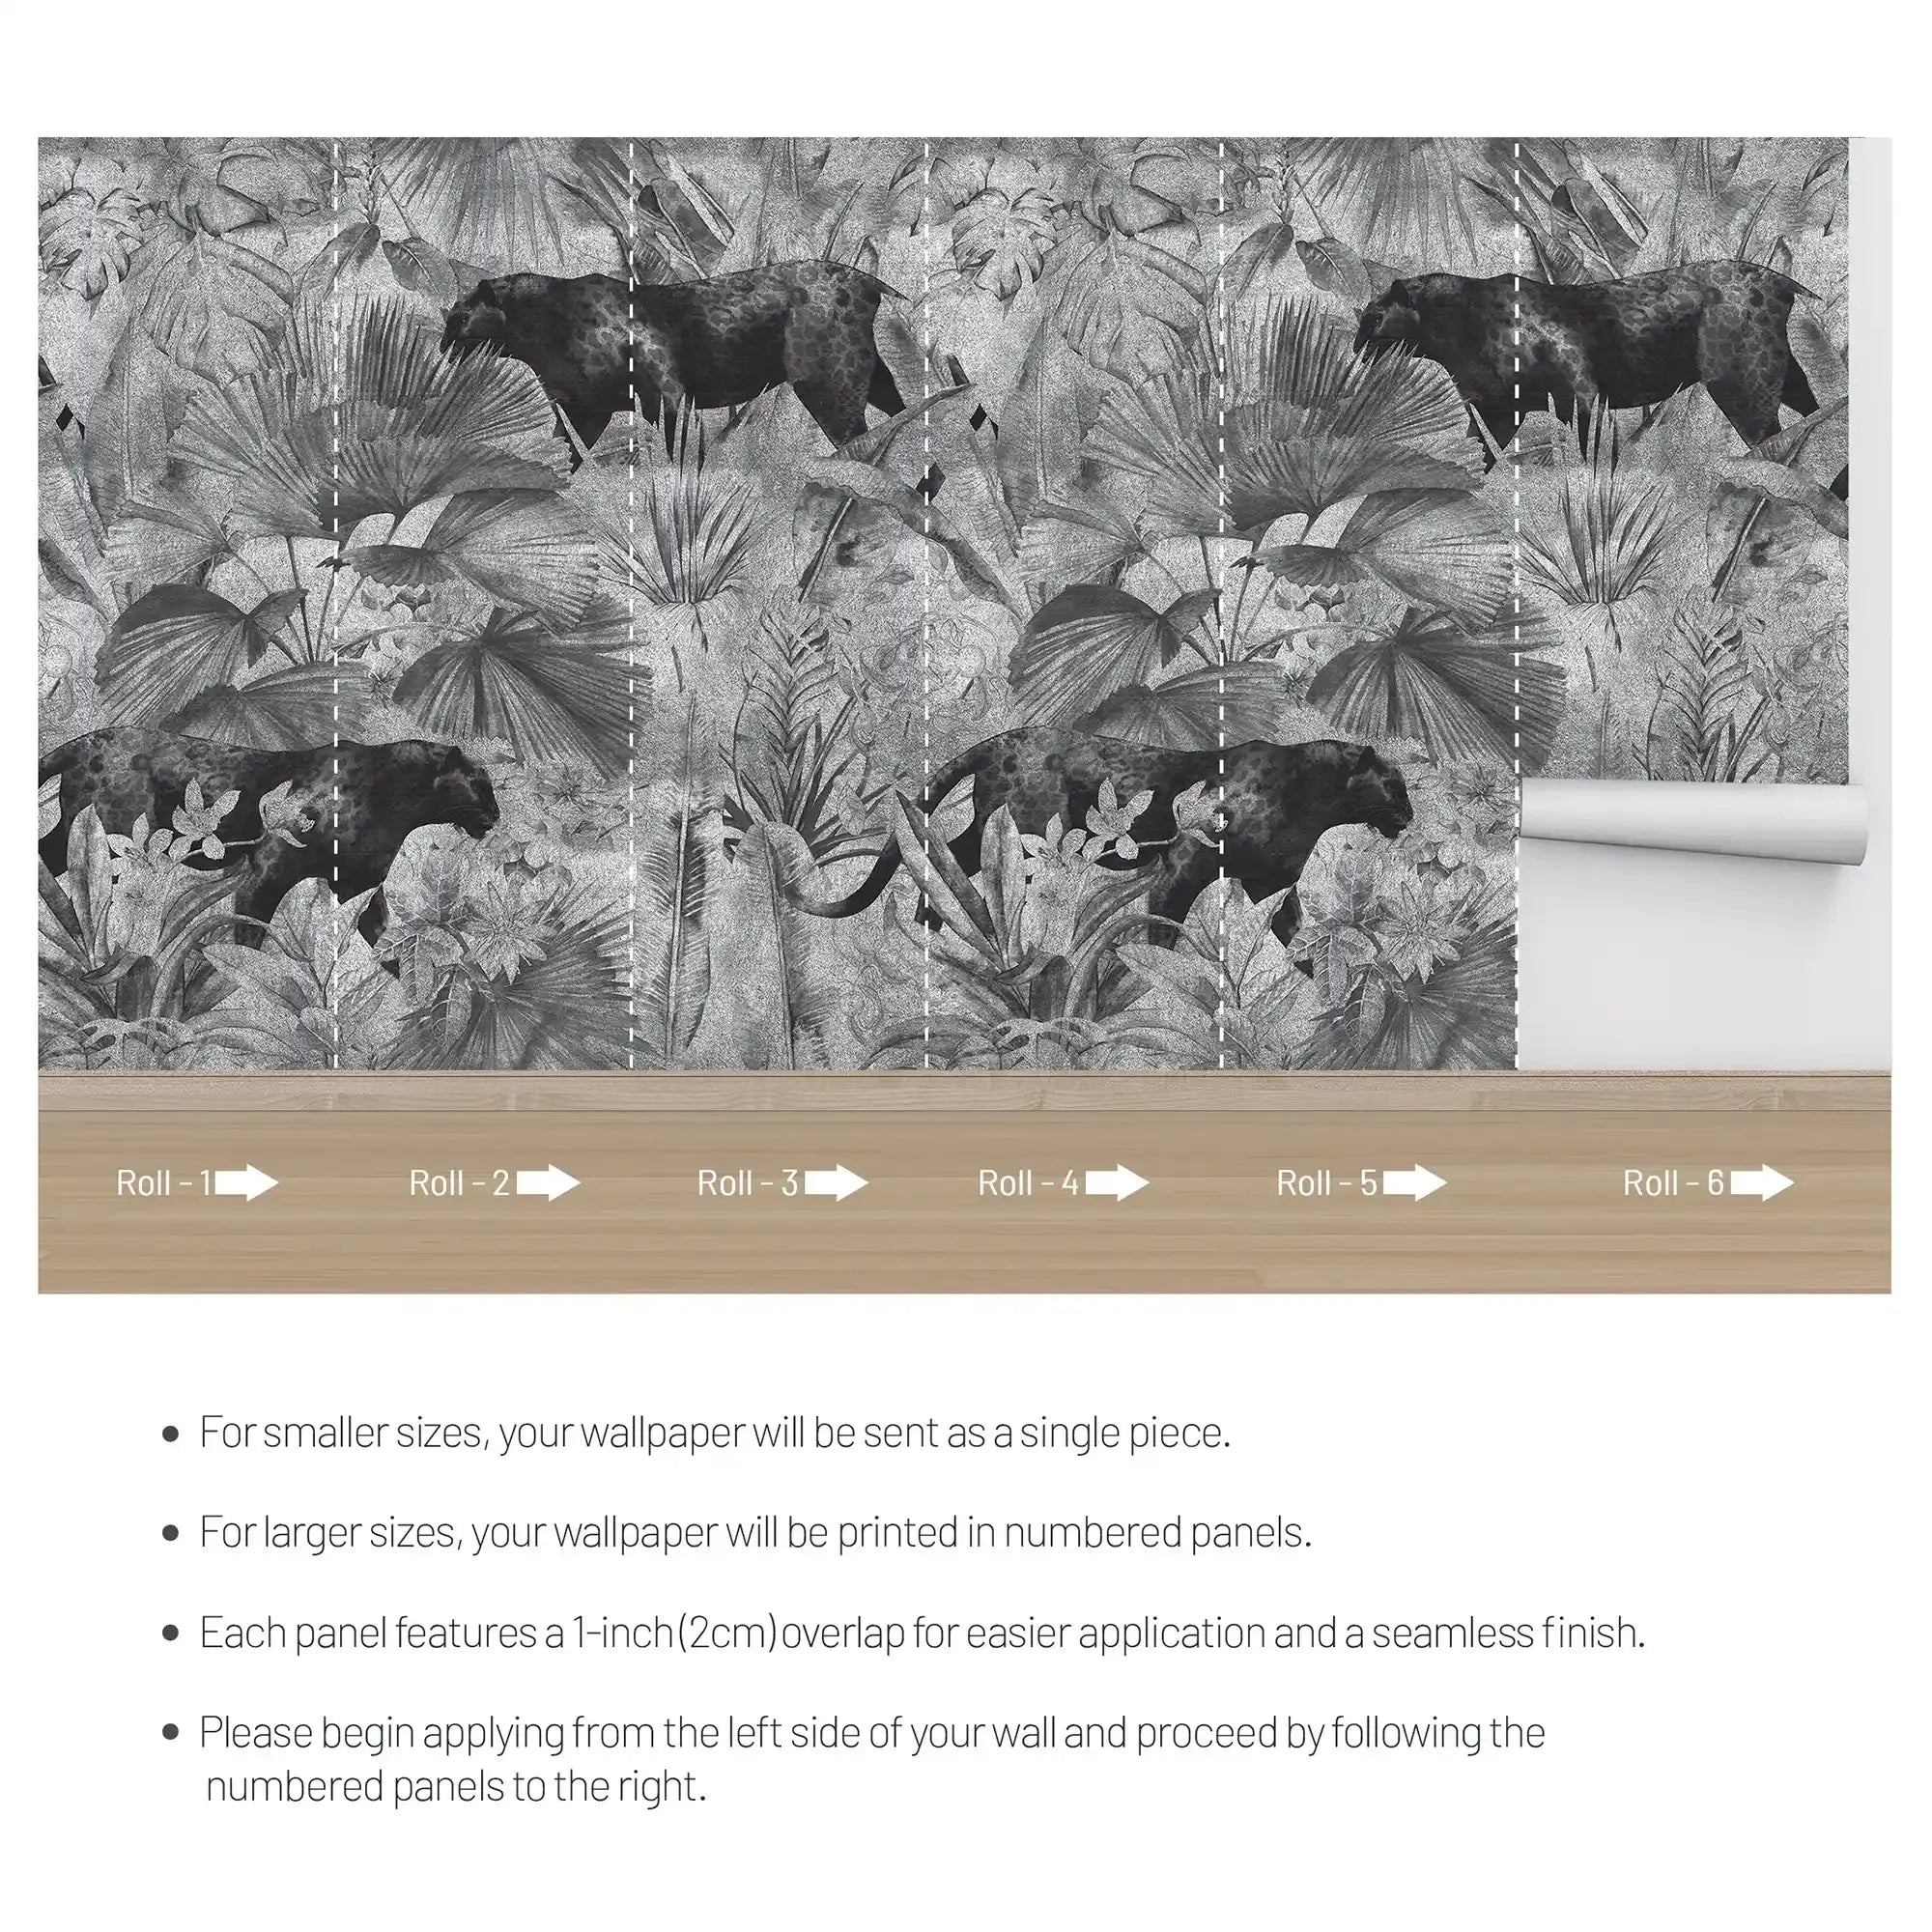 3076-E / Botanical Wallpaper with Panther Theme: Adhesive Mural for Wall Accent - Artevella